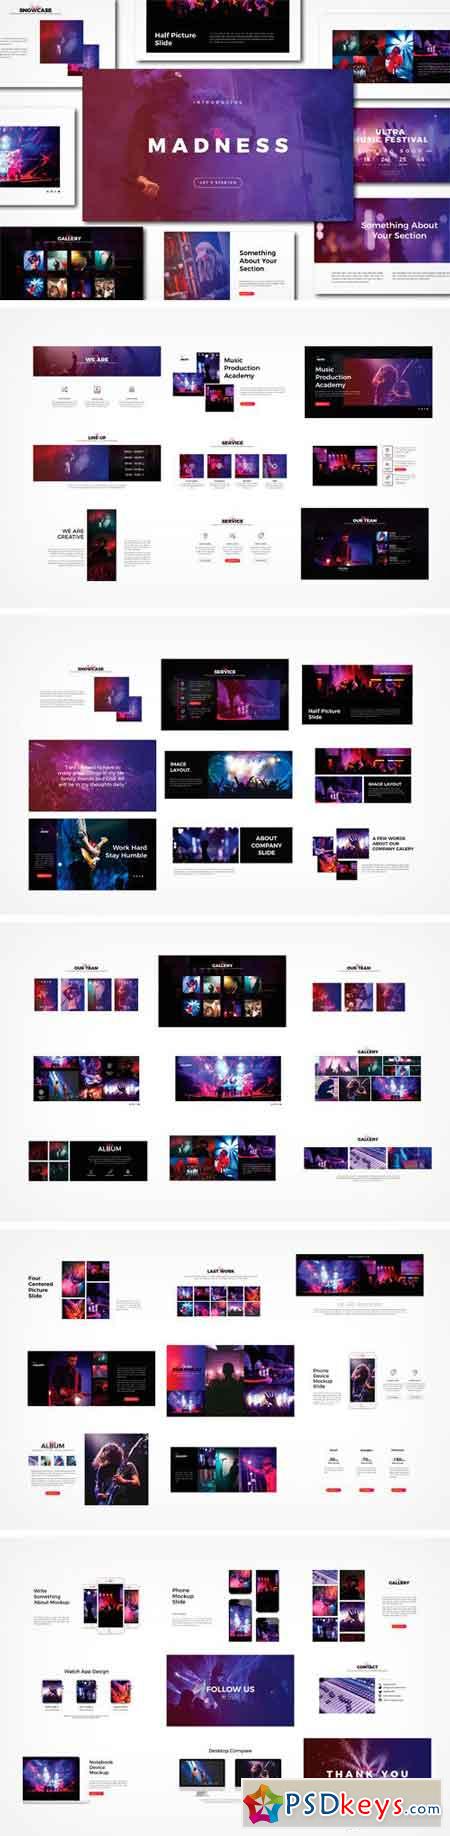 Madness Powerpoint Template 2066359